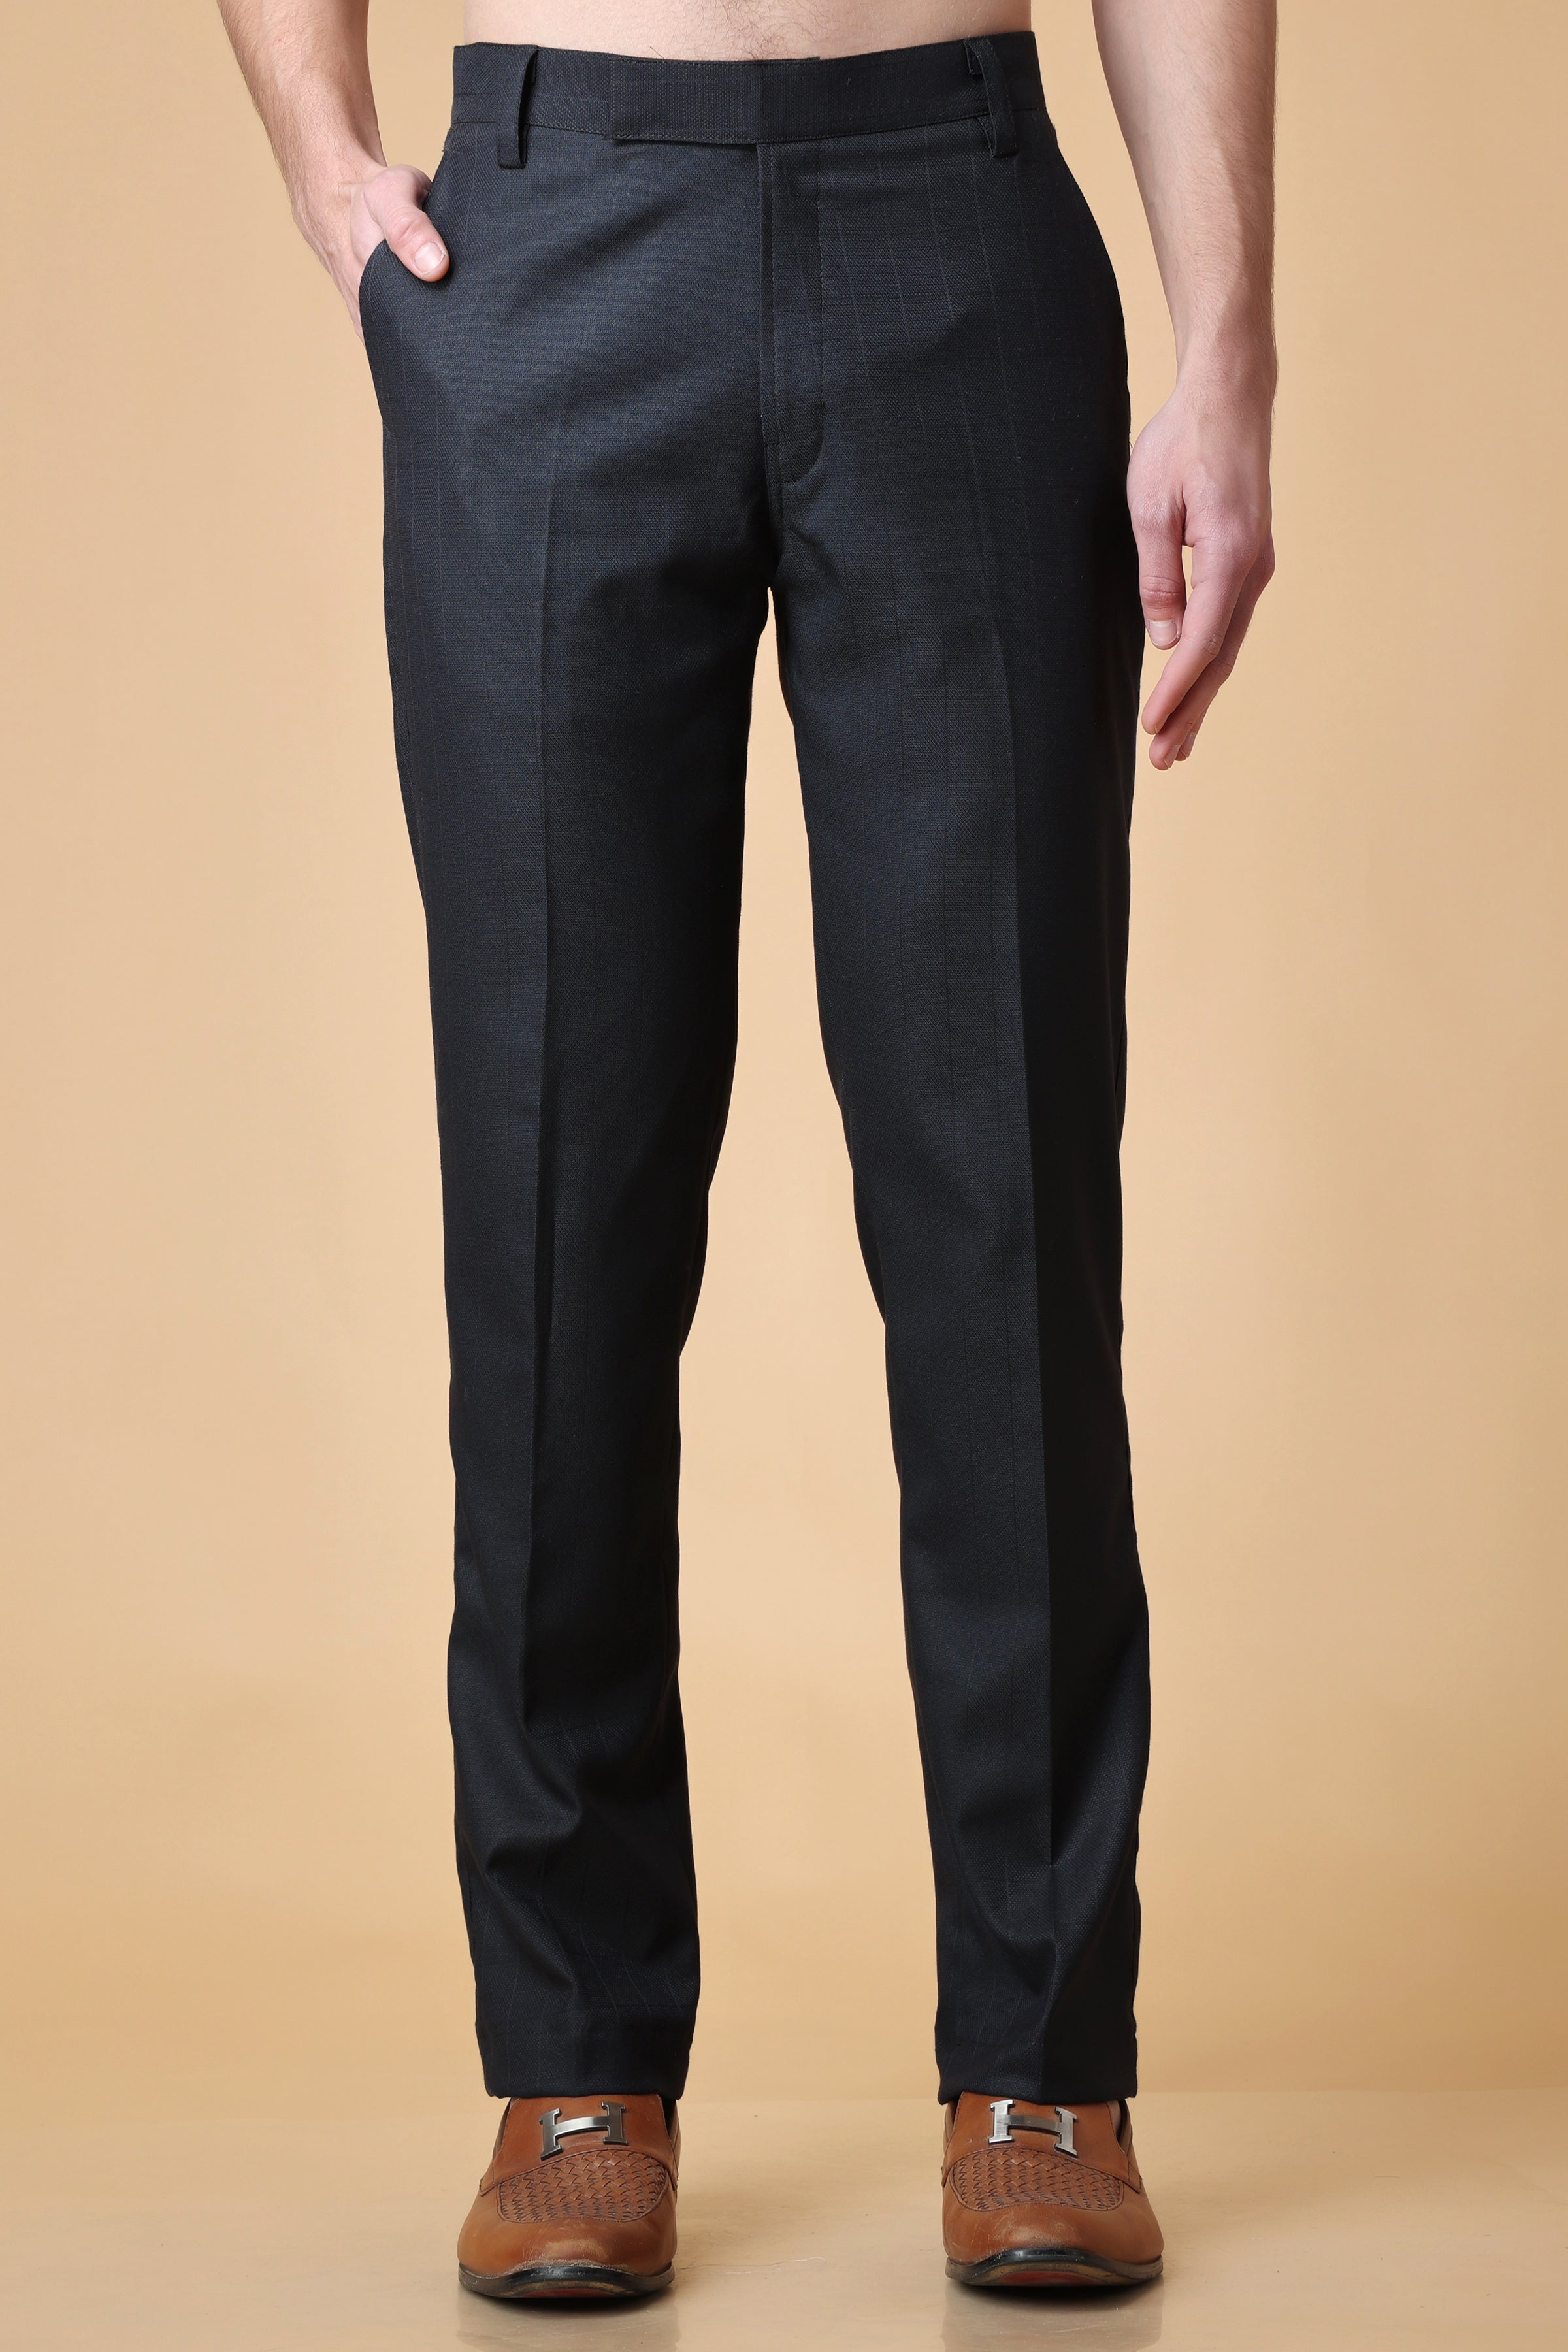 Buy Readymade Trouser & High Waisted Black Trousers - Apella